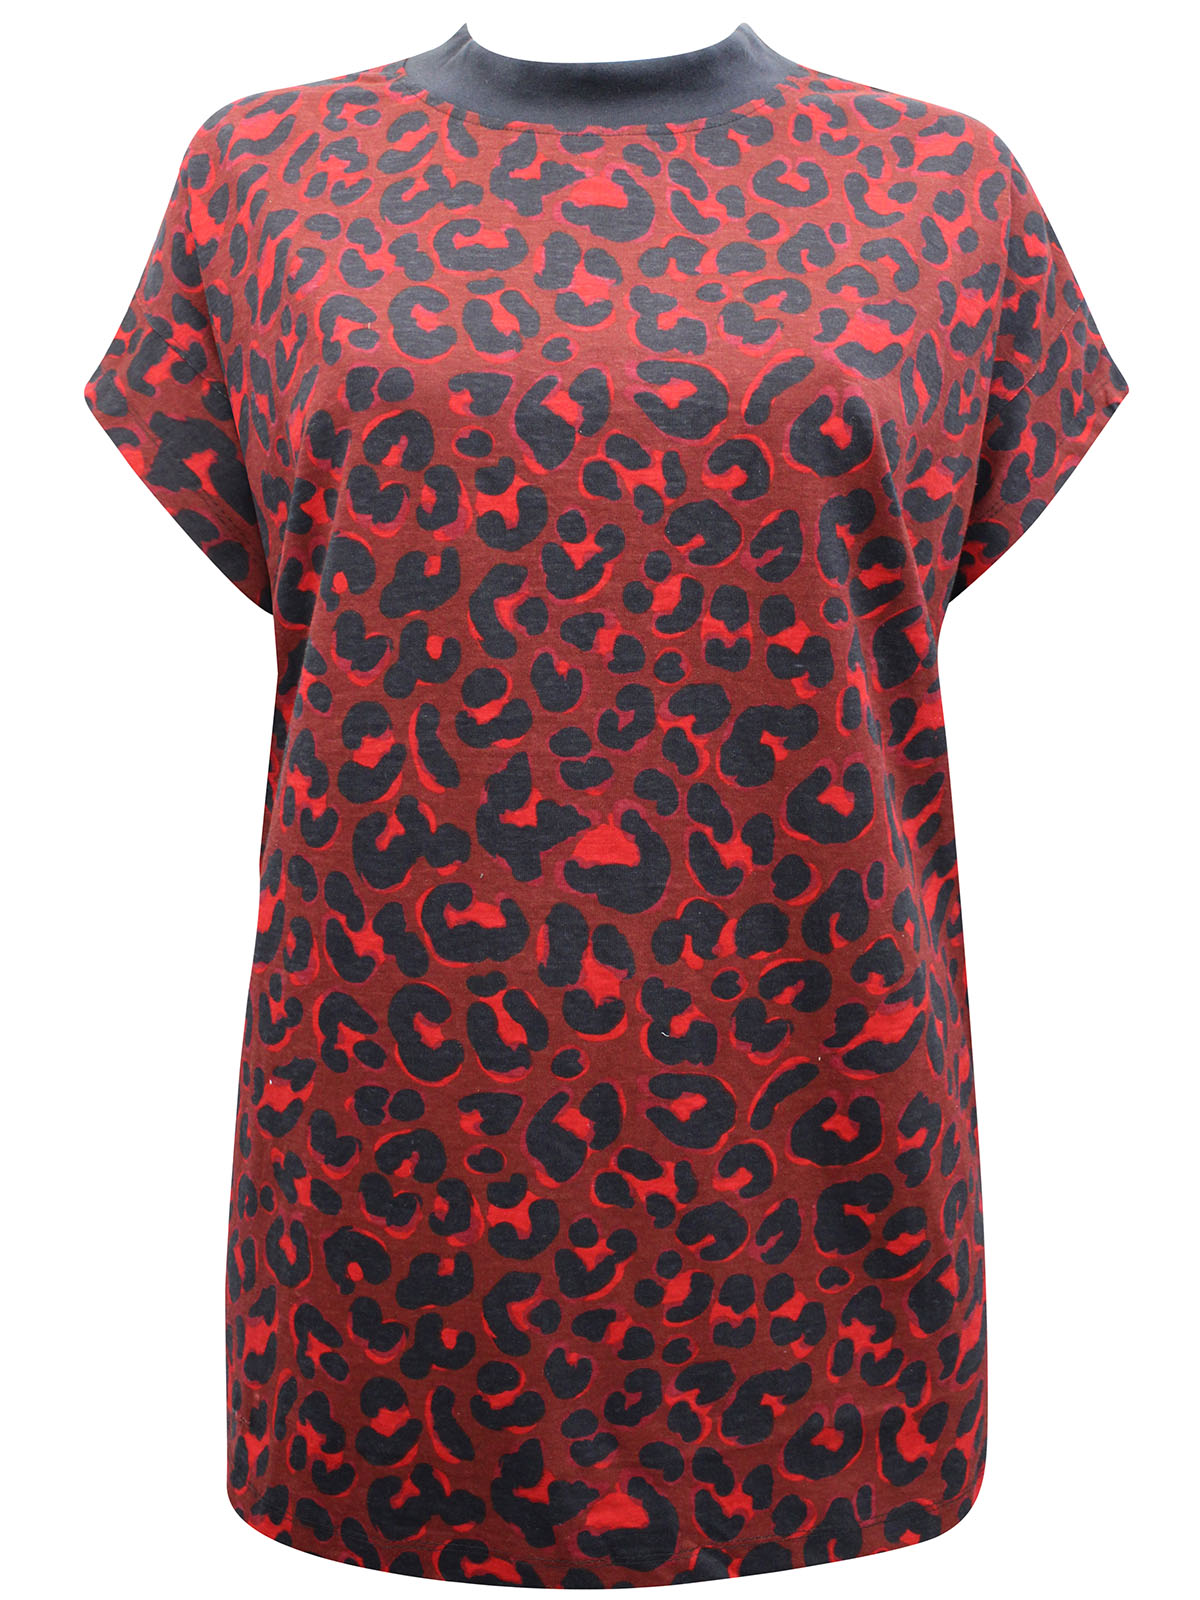 Plus Size wholesale clothing by simply be - - SimplyBe RED Animal Print ...